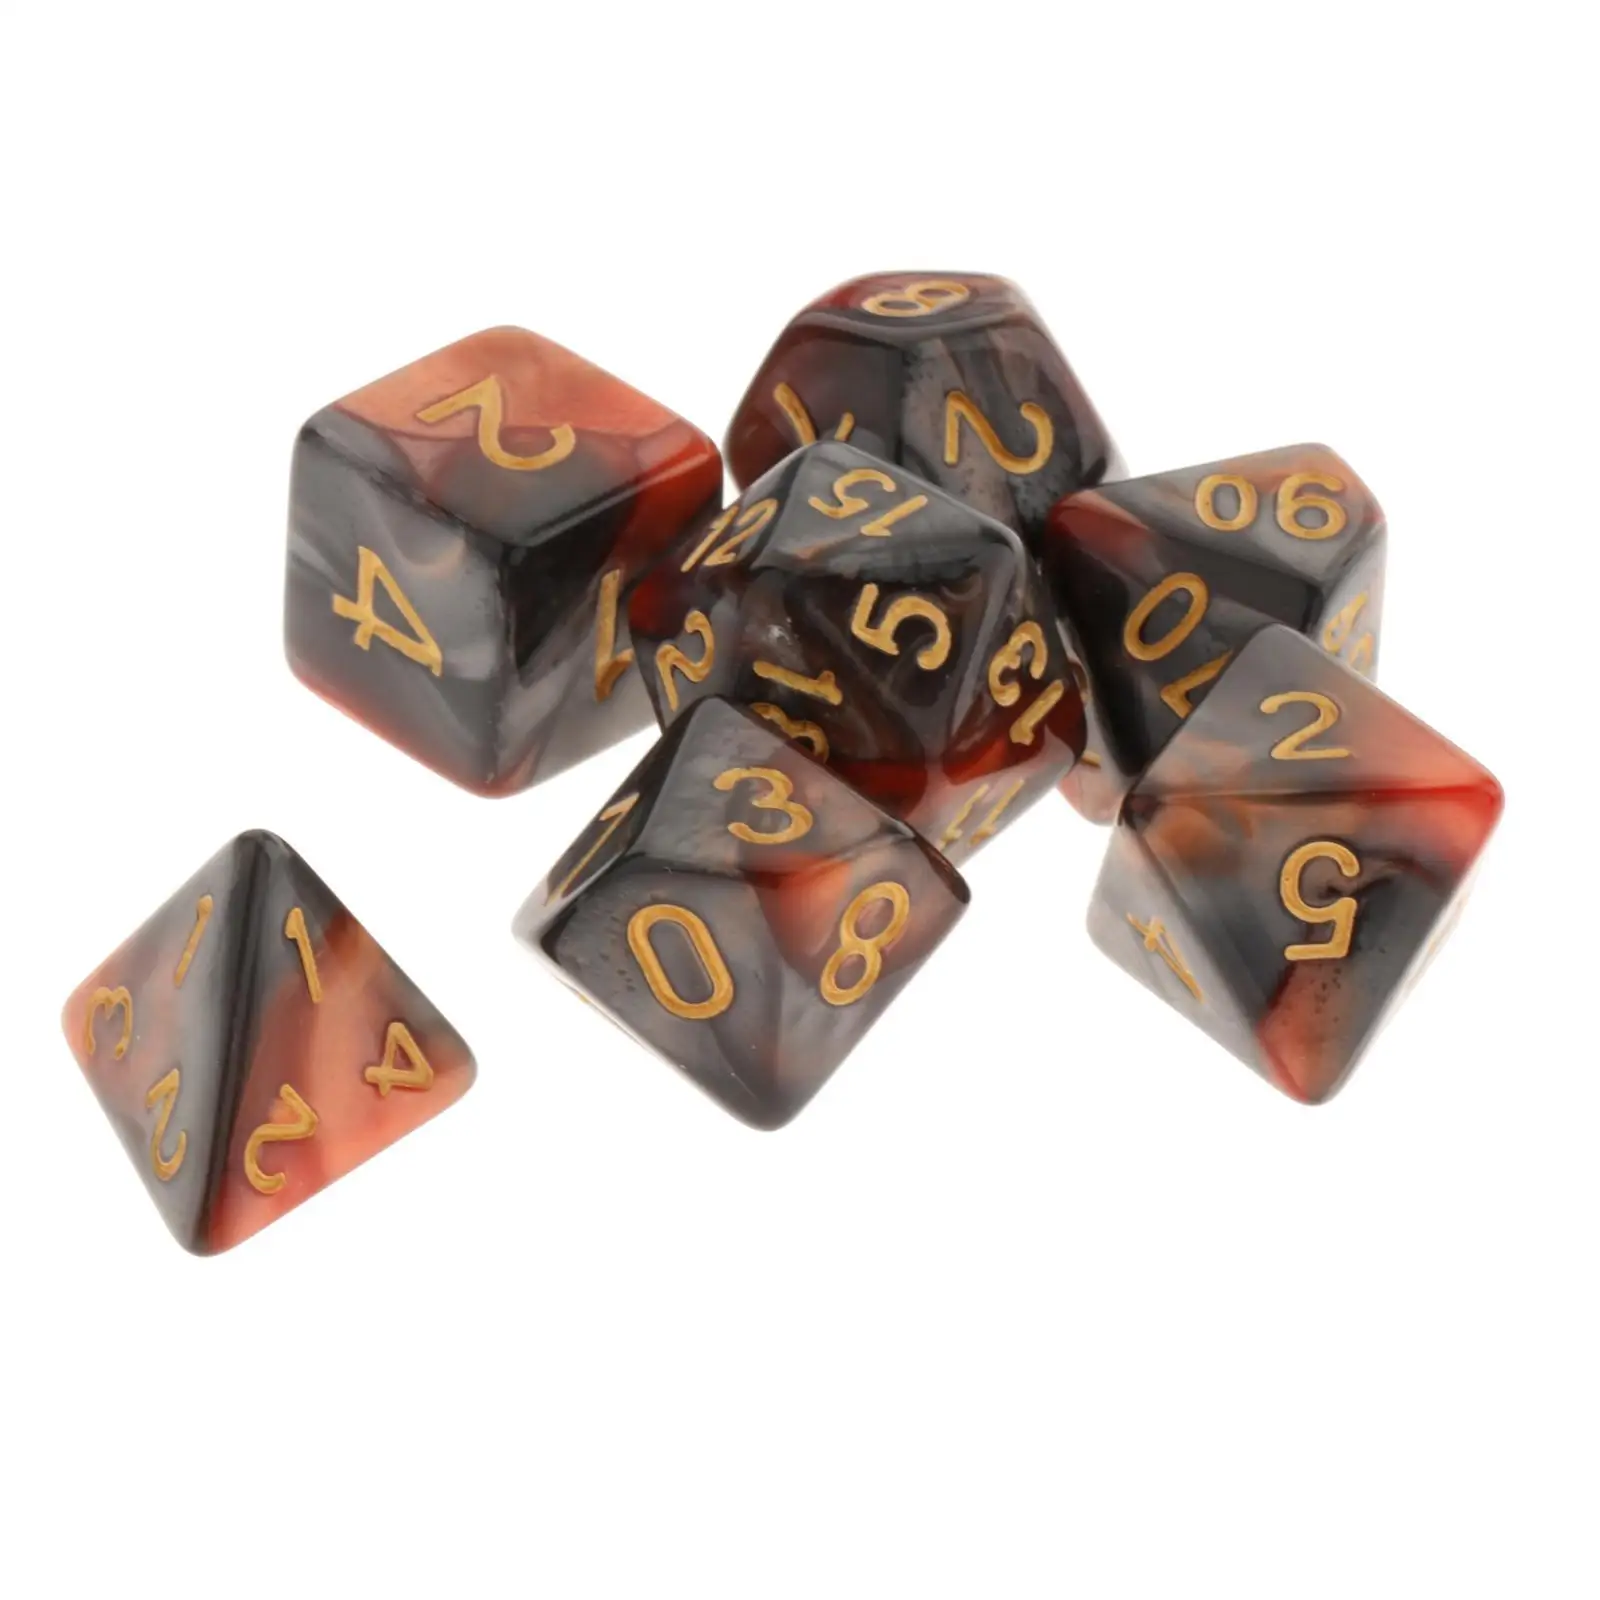 7pcs/set Polyhedral Games Dice Multi Sides Dice for Board Game Bloody Dice C1 F1 for sale online